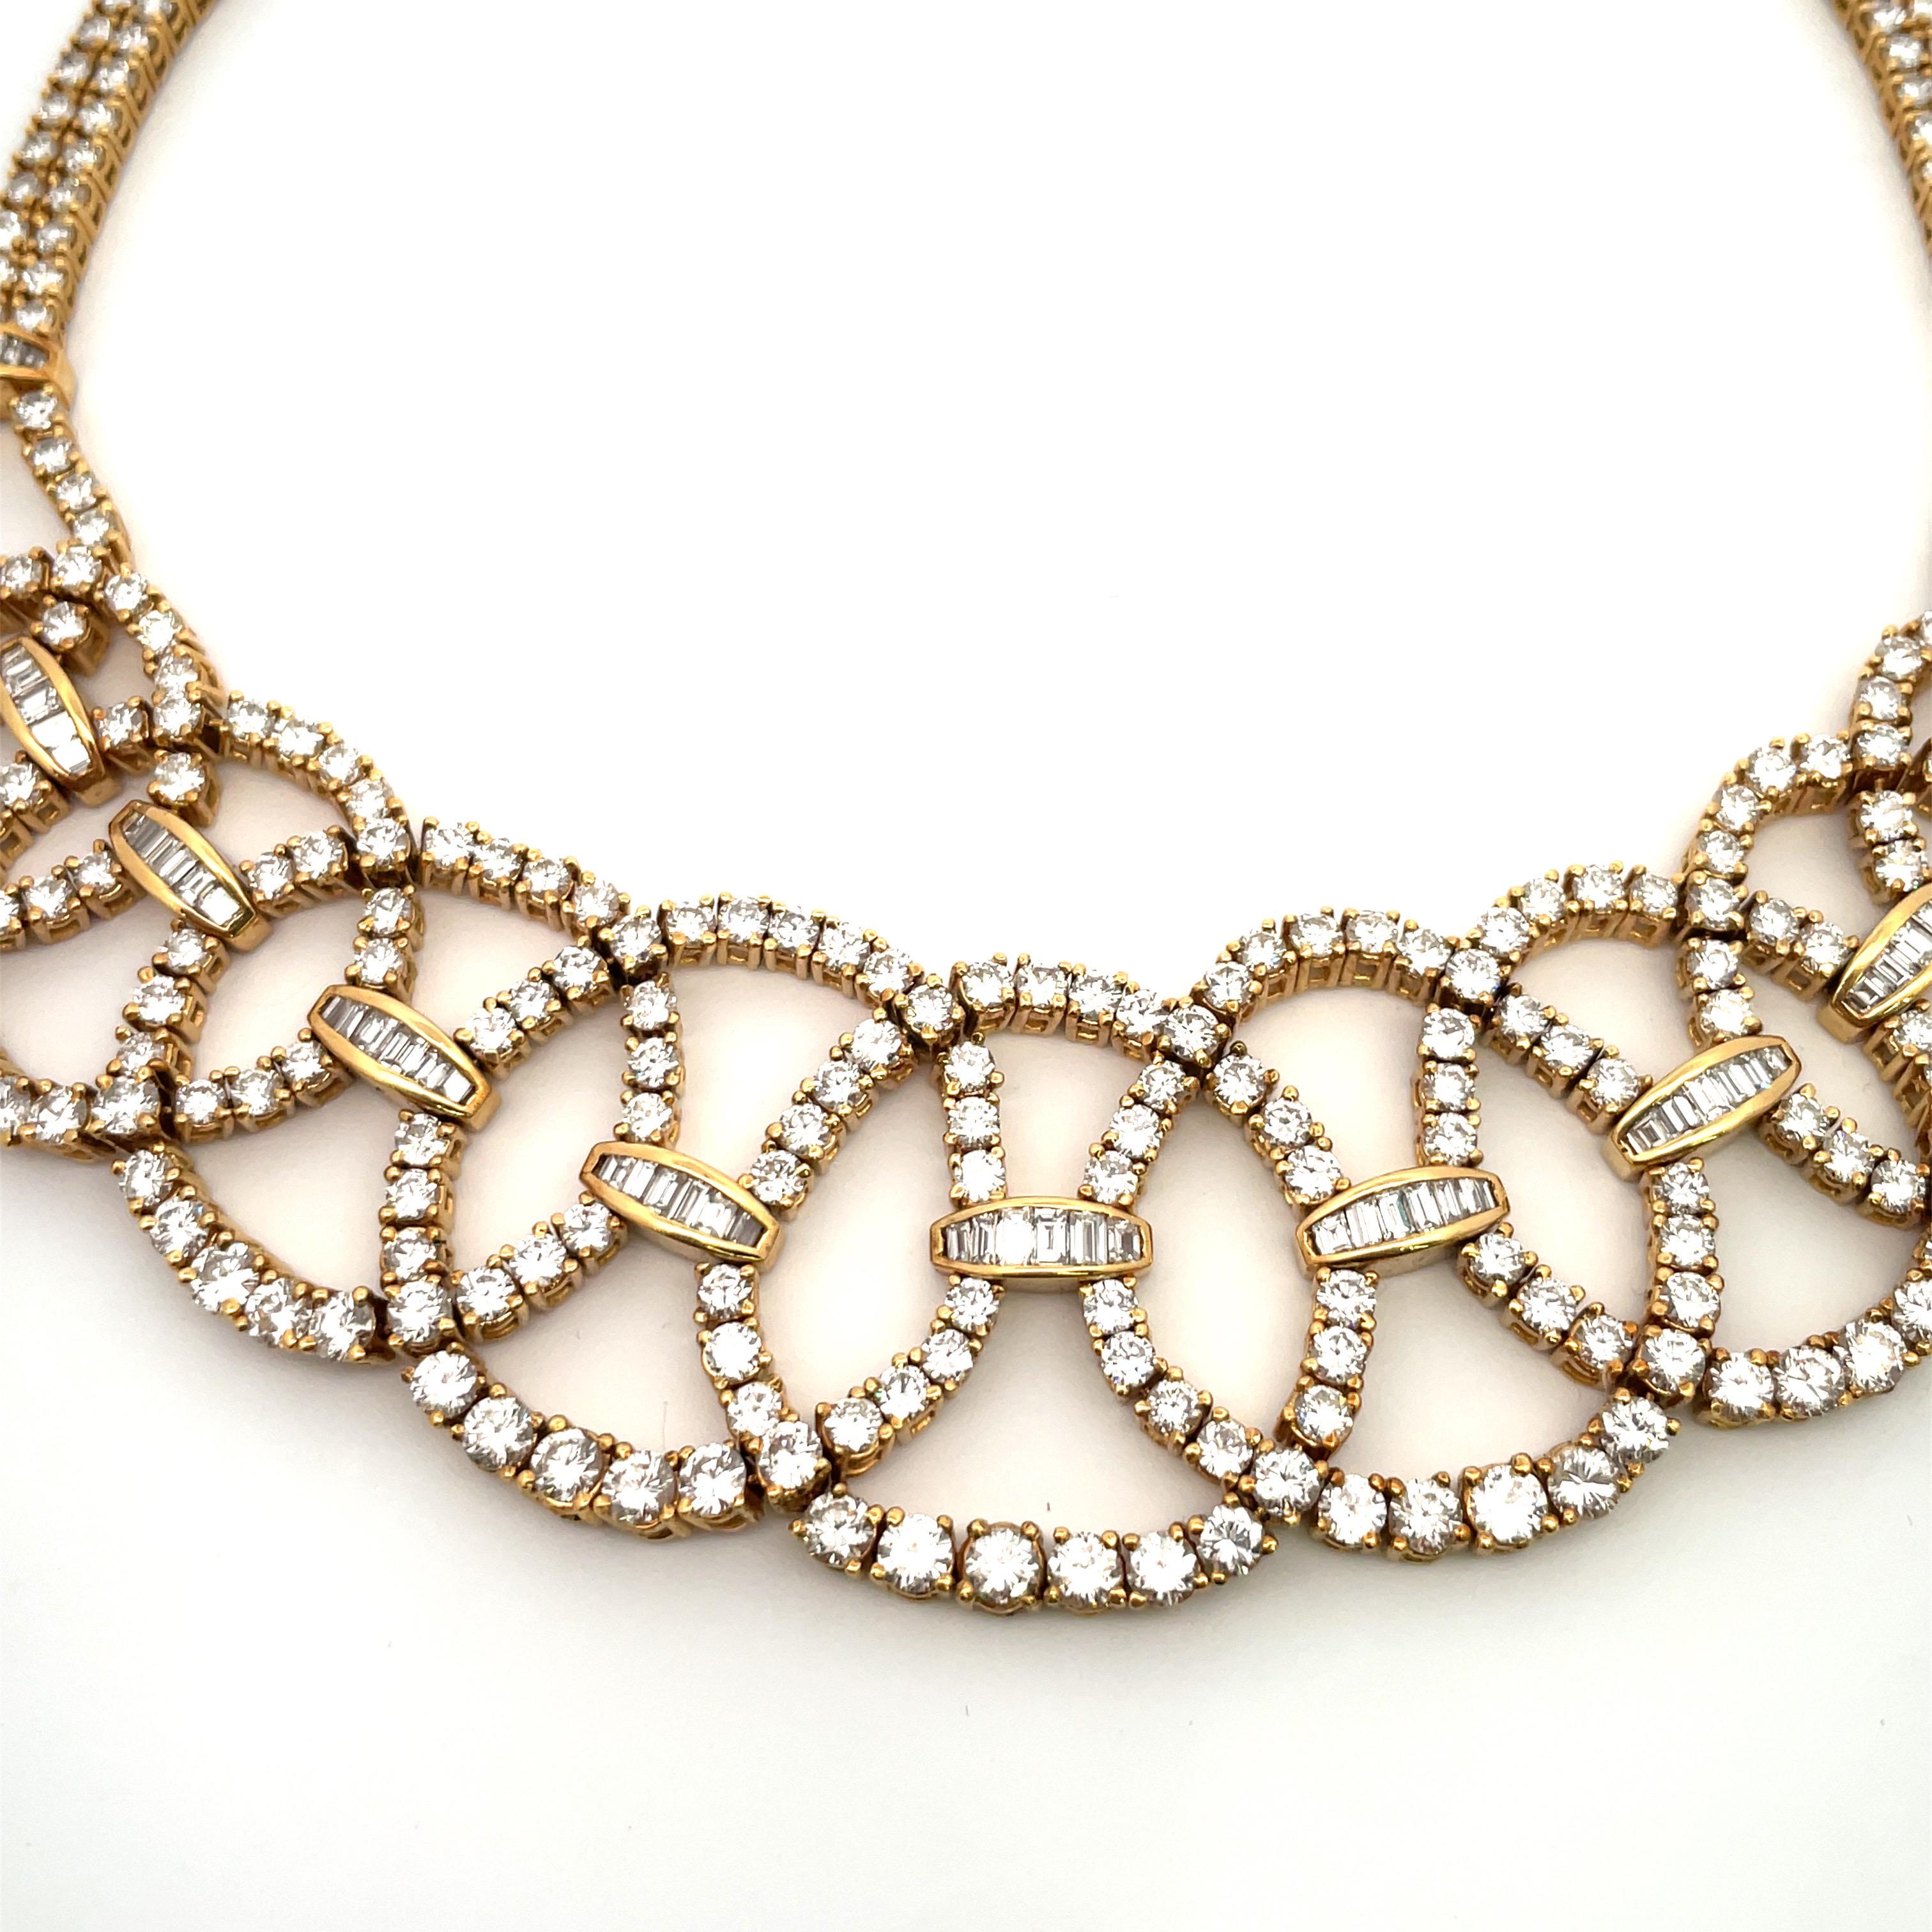 Circa 1950s Diamond Collar Necklace 45 Carats 18 Karat Yellow Gold In Excellent Condition For Sale In New York, NY